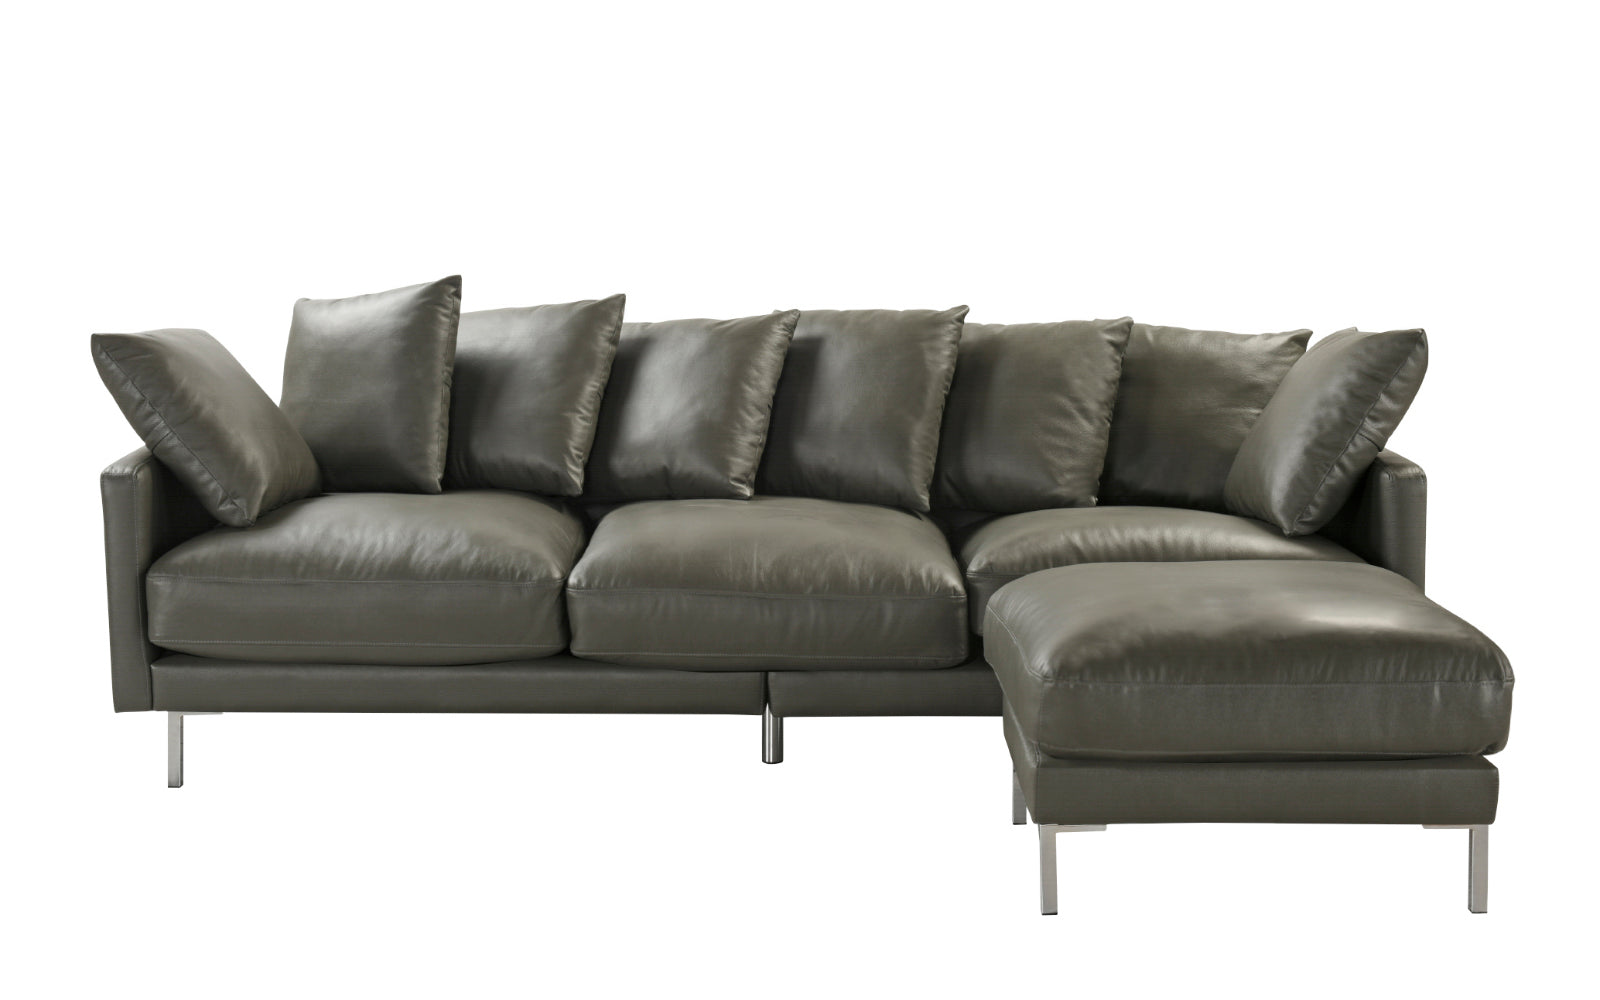 EXP340-GR Albany Modern Leather Match Sectional Sofa with St sku EXP340-GR